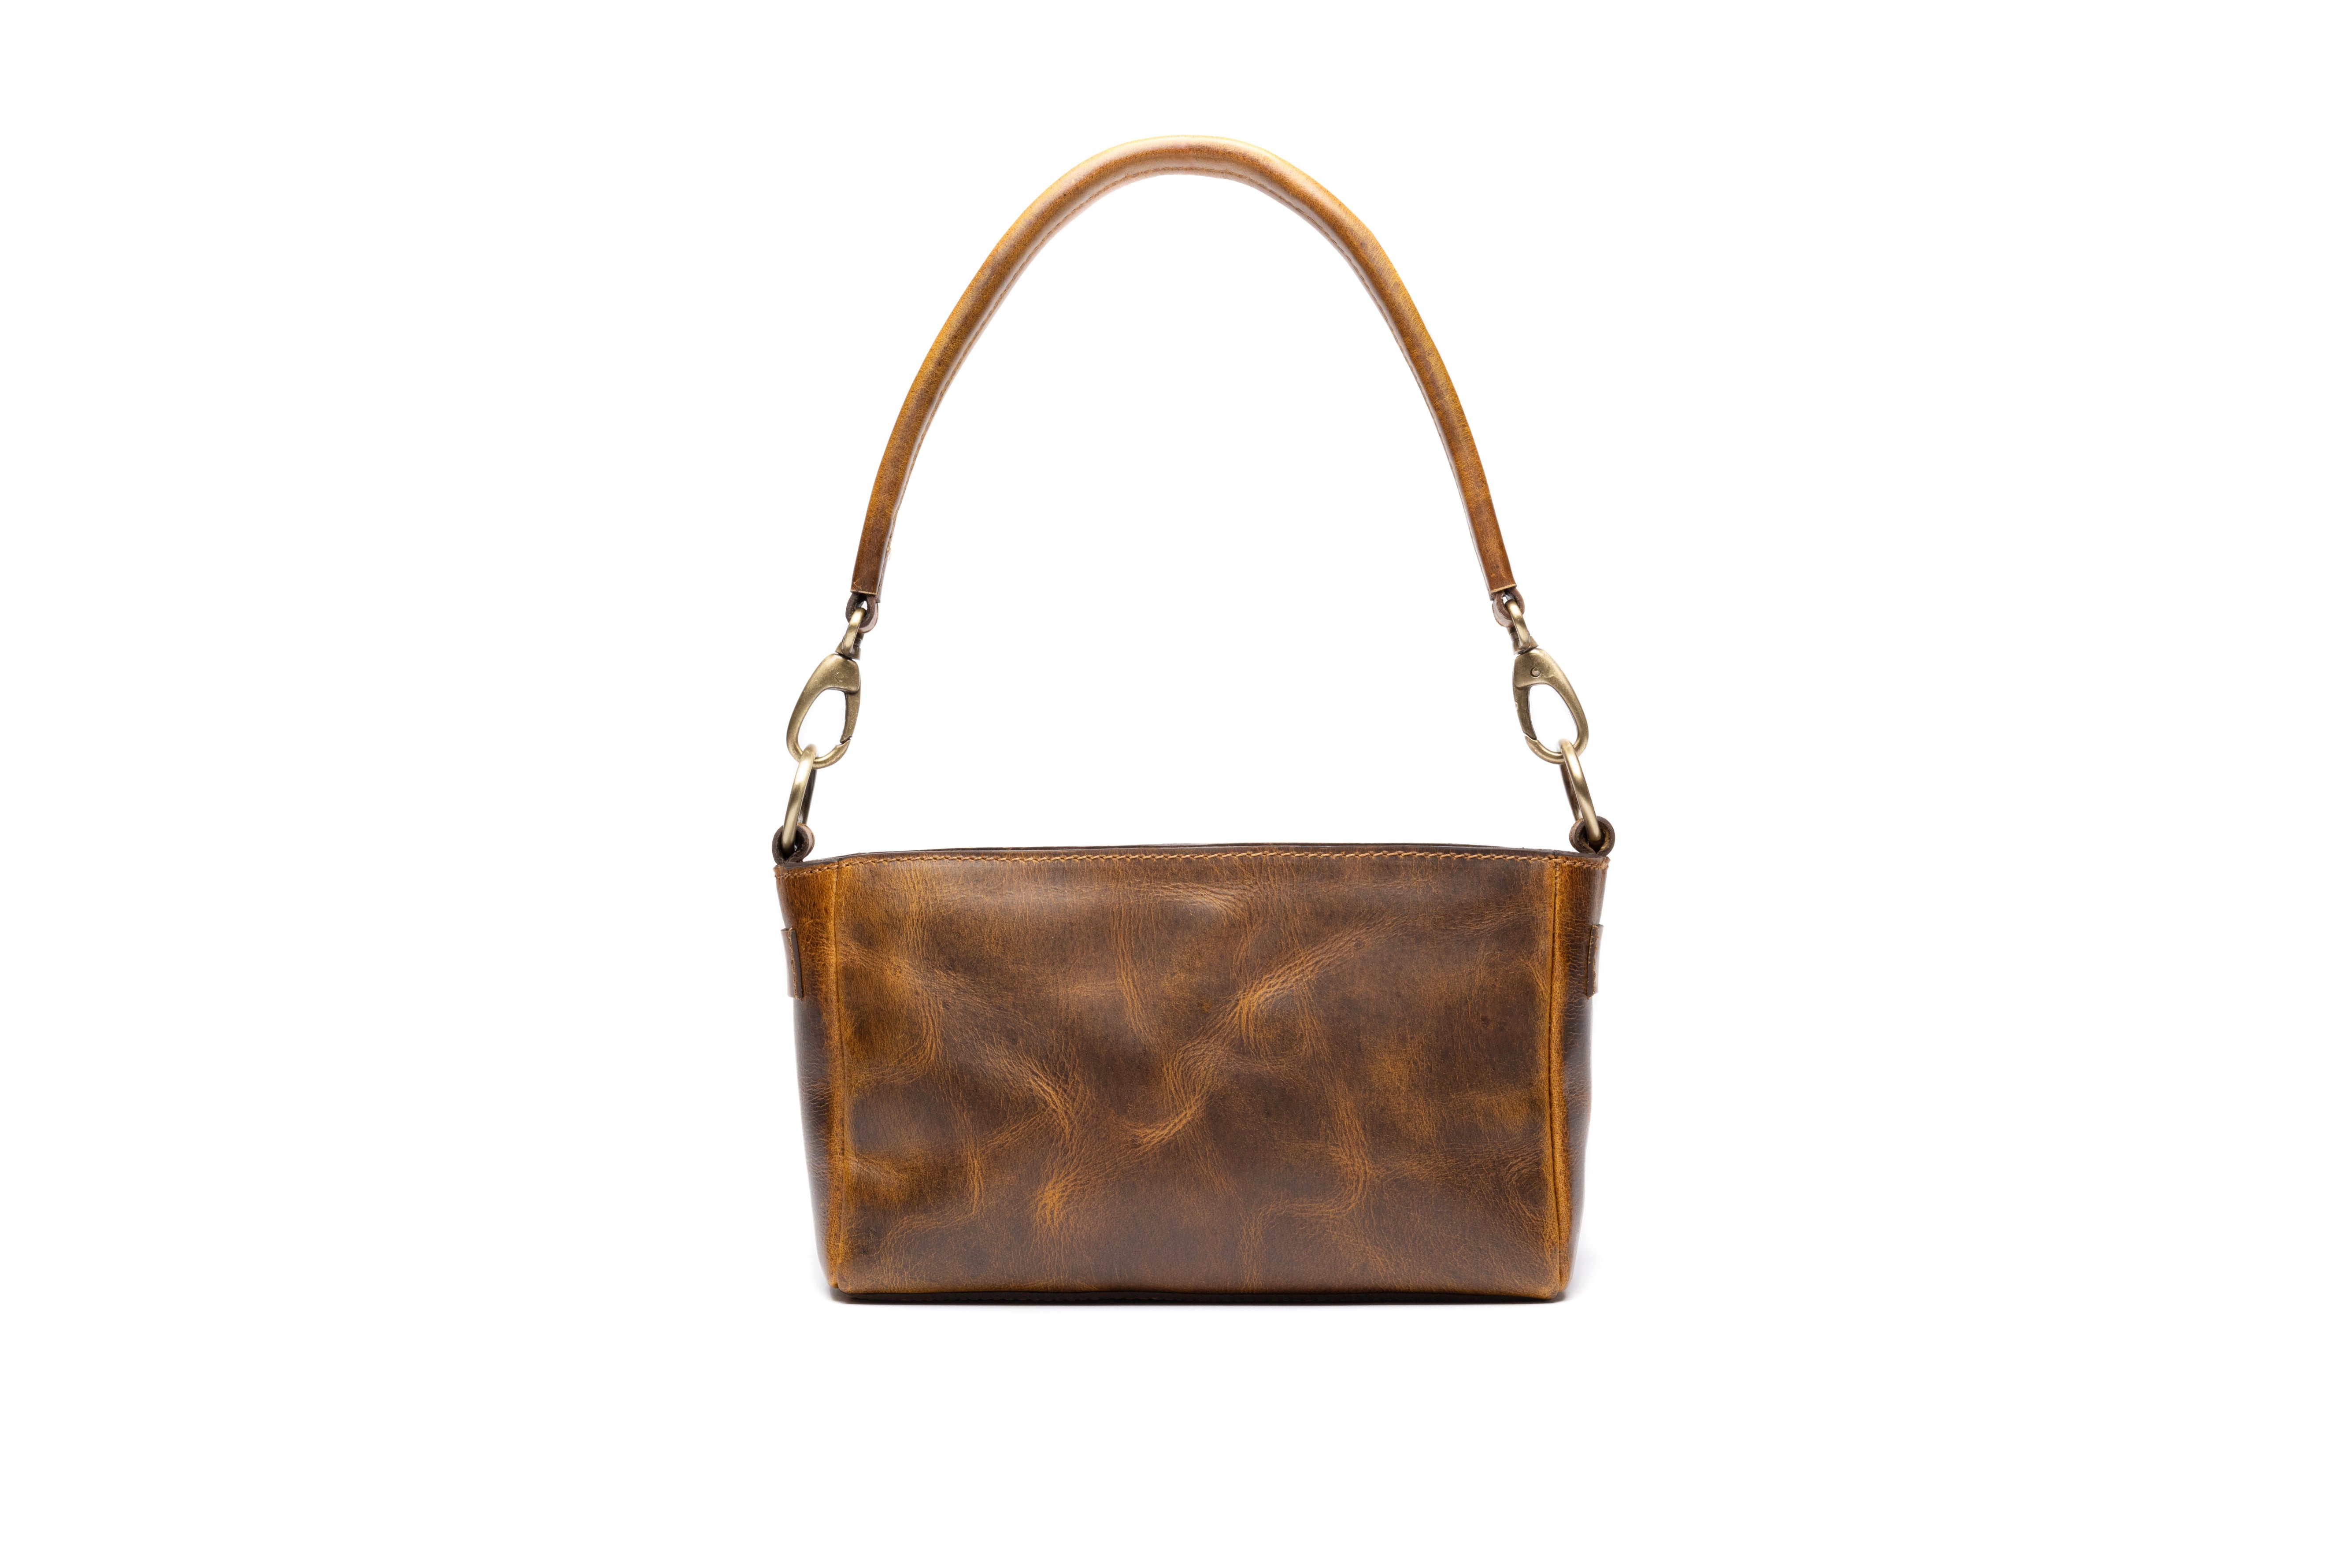 Stylish fashionable leather purse  shown with leather handle in distressed leather.